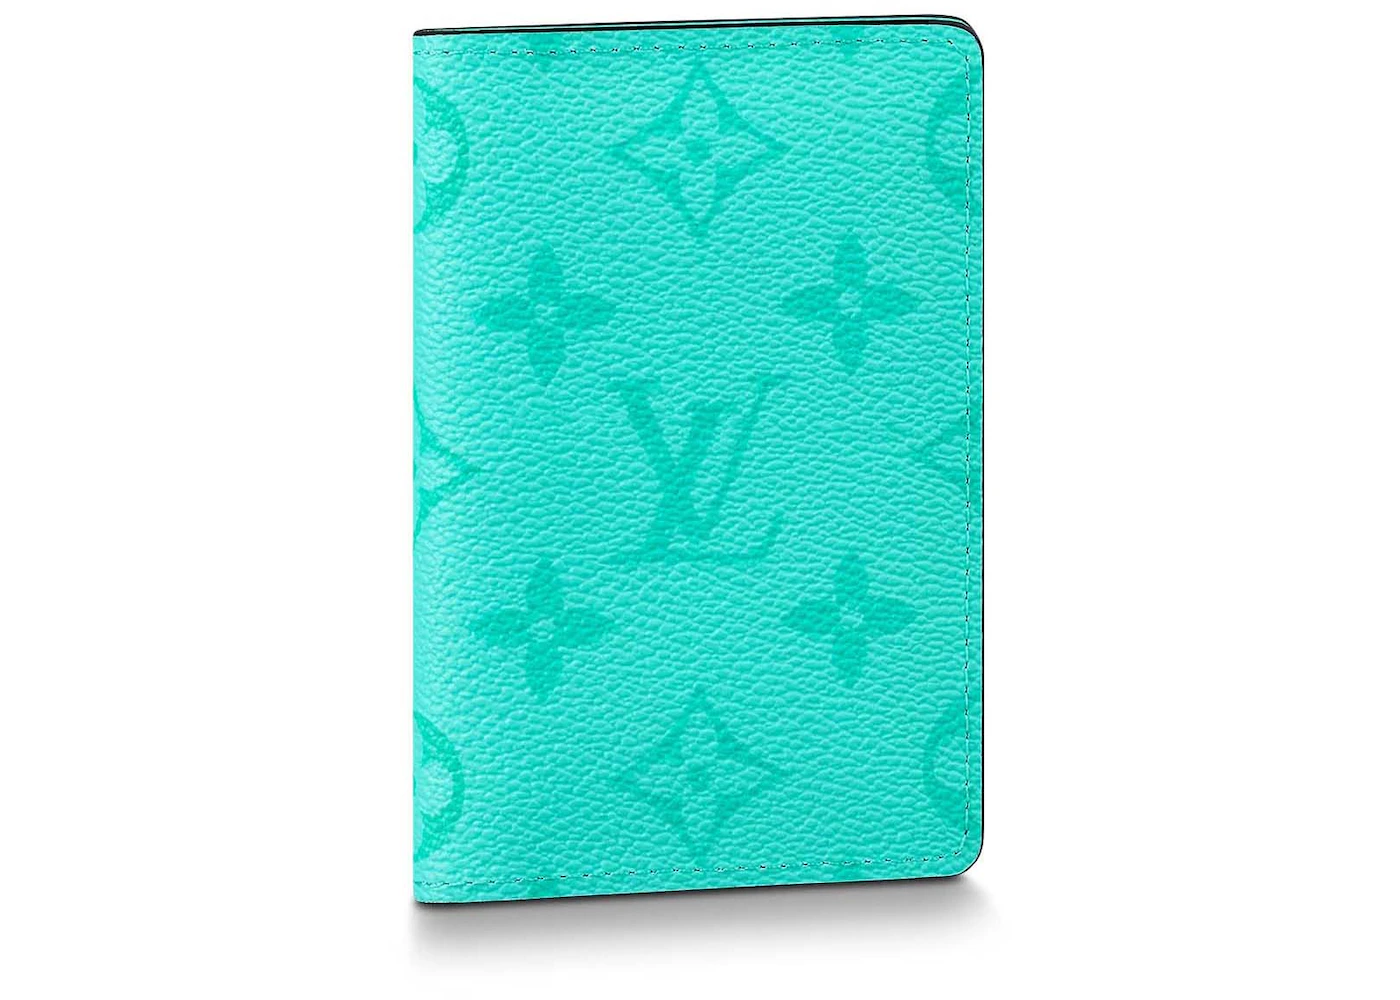 Louis Vuitton Pocket Organizer Miami Green in Monogram Coated Canvas/Taiga  Cowhide Leather - US